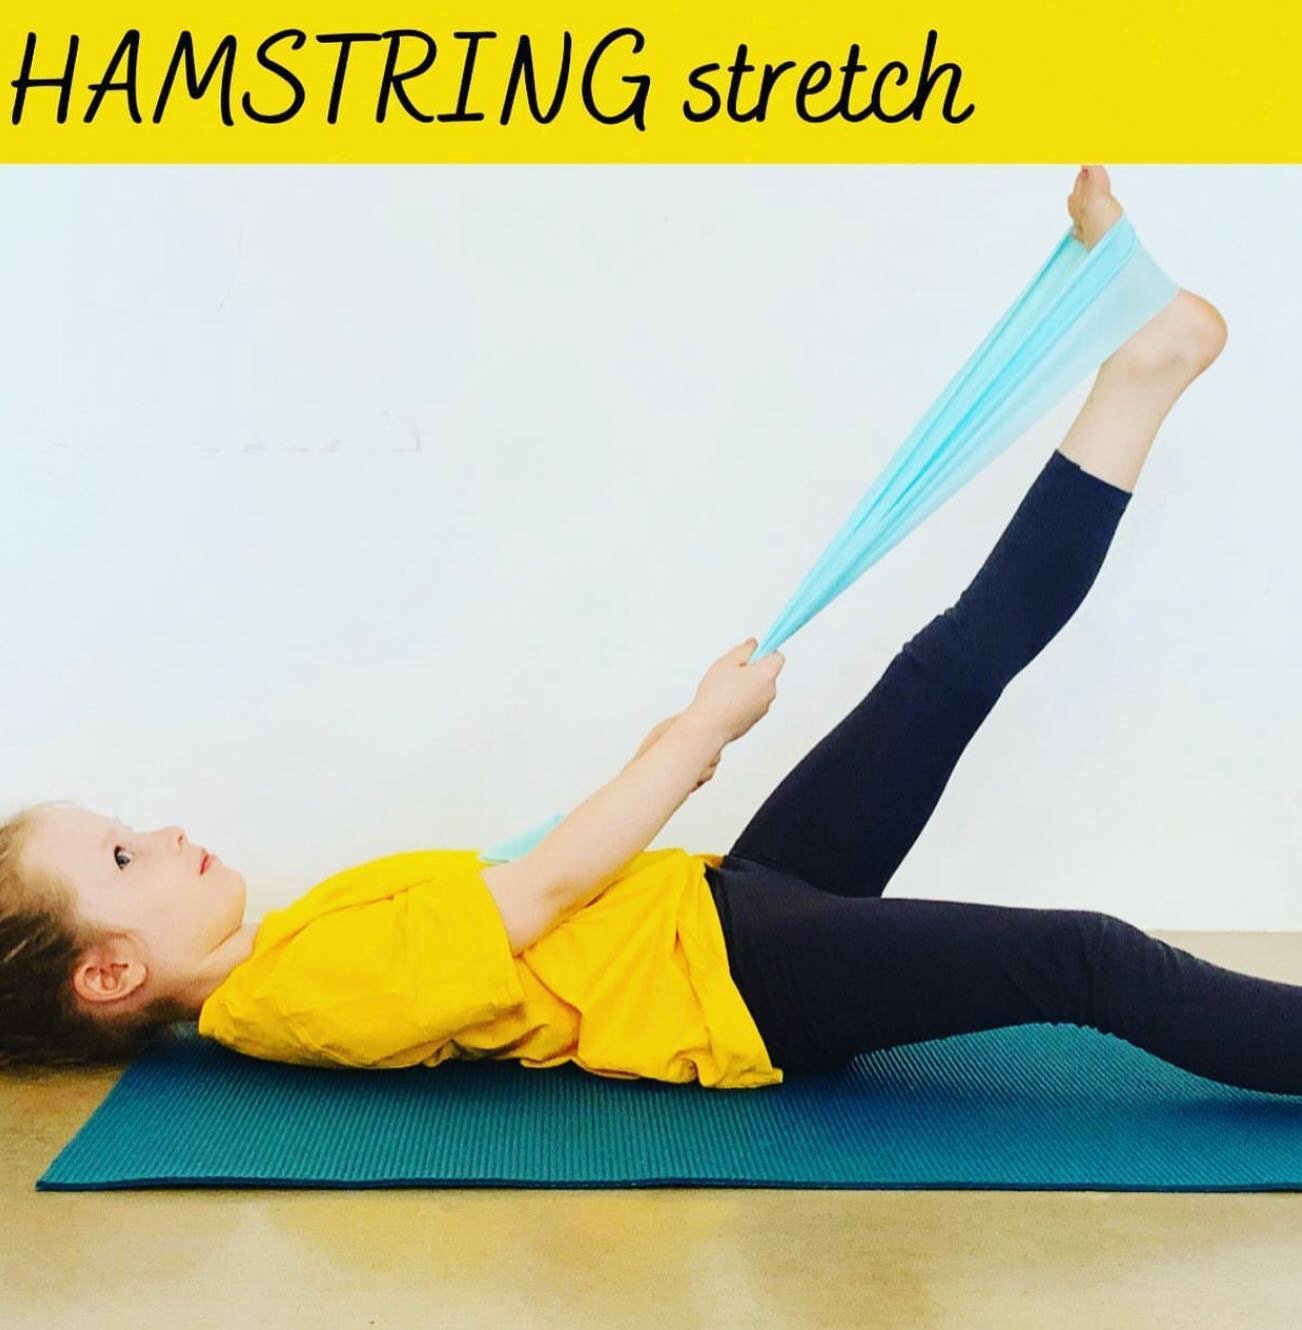 H A M S T R I N G S. 
As a Podiatrist unfortunately it is very rare to come across children in practice that have adequate flexibility in their hamstrings. They are a super important muscle group for movement and postural development. In hypermobile 